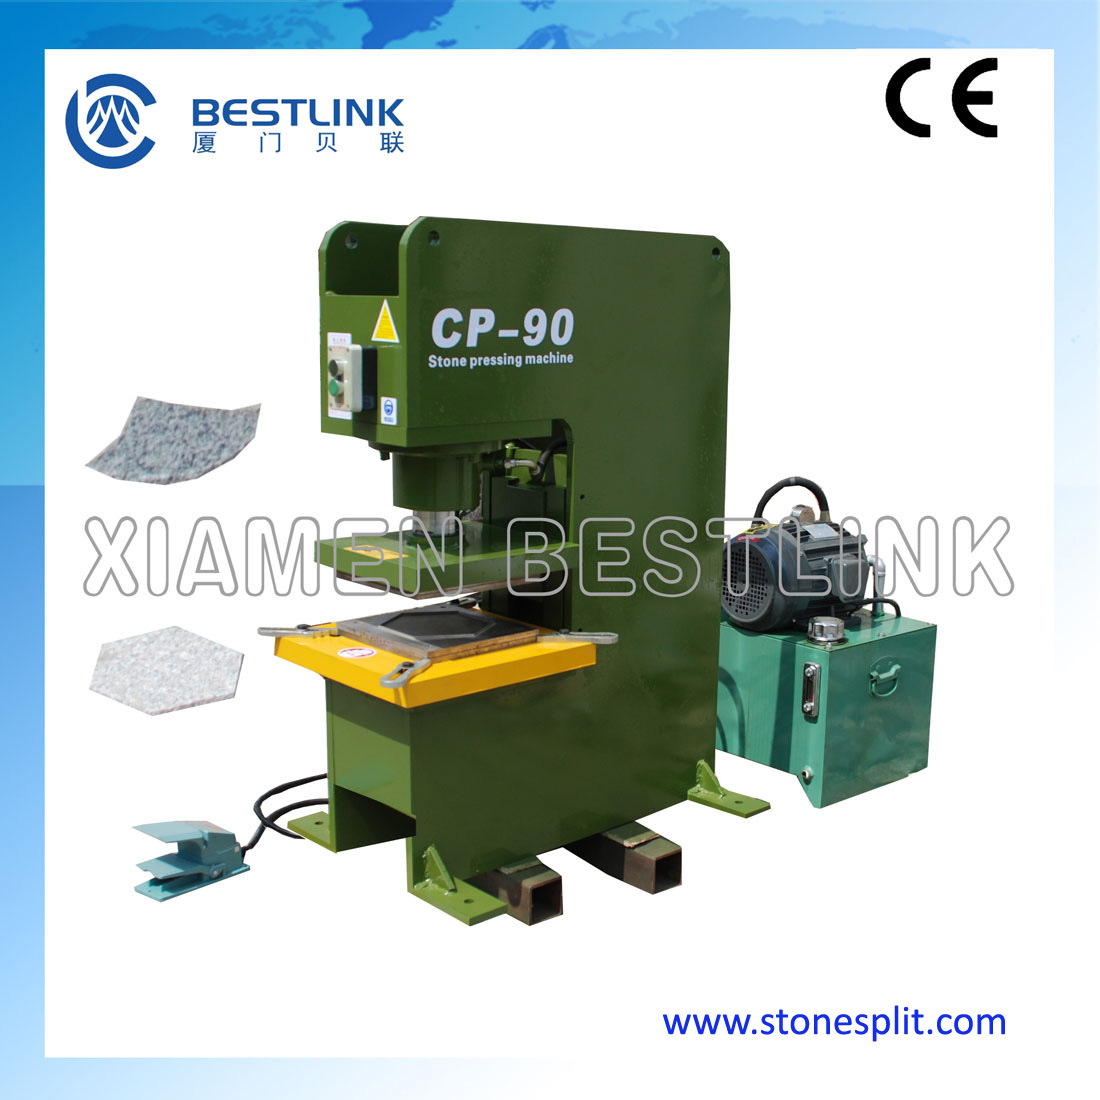 Hydraulic Stone Pressing Machine for Making Road Stones